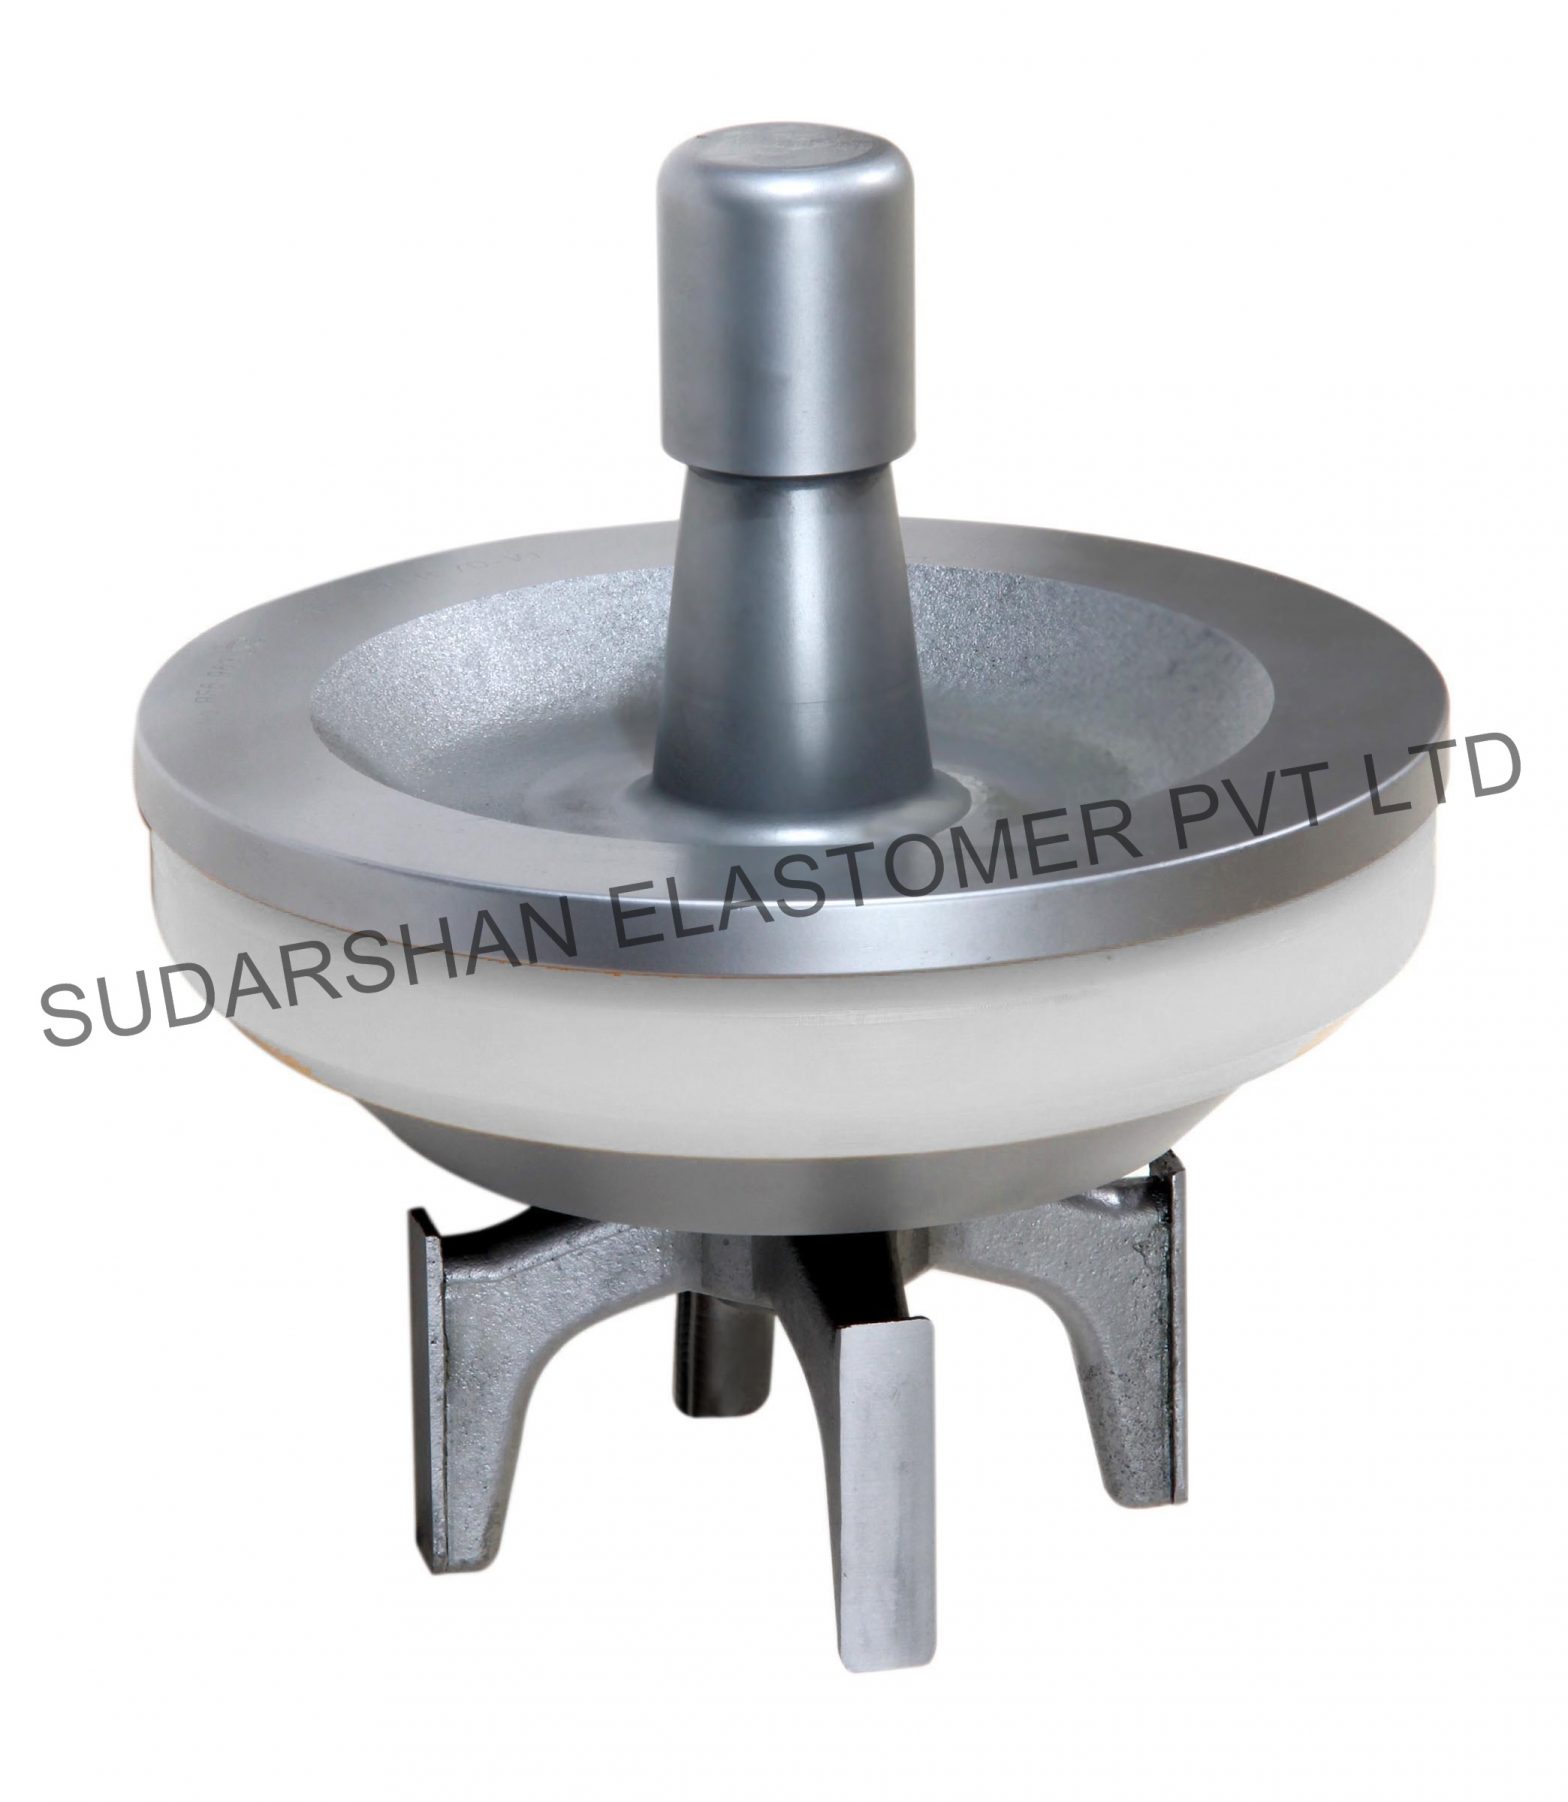 PERFORMANCE VALVE (HIGH TEMPERATURE) AND FULL OPEN SEAT